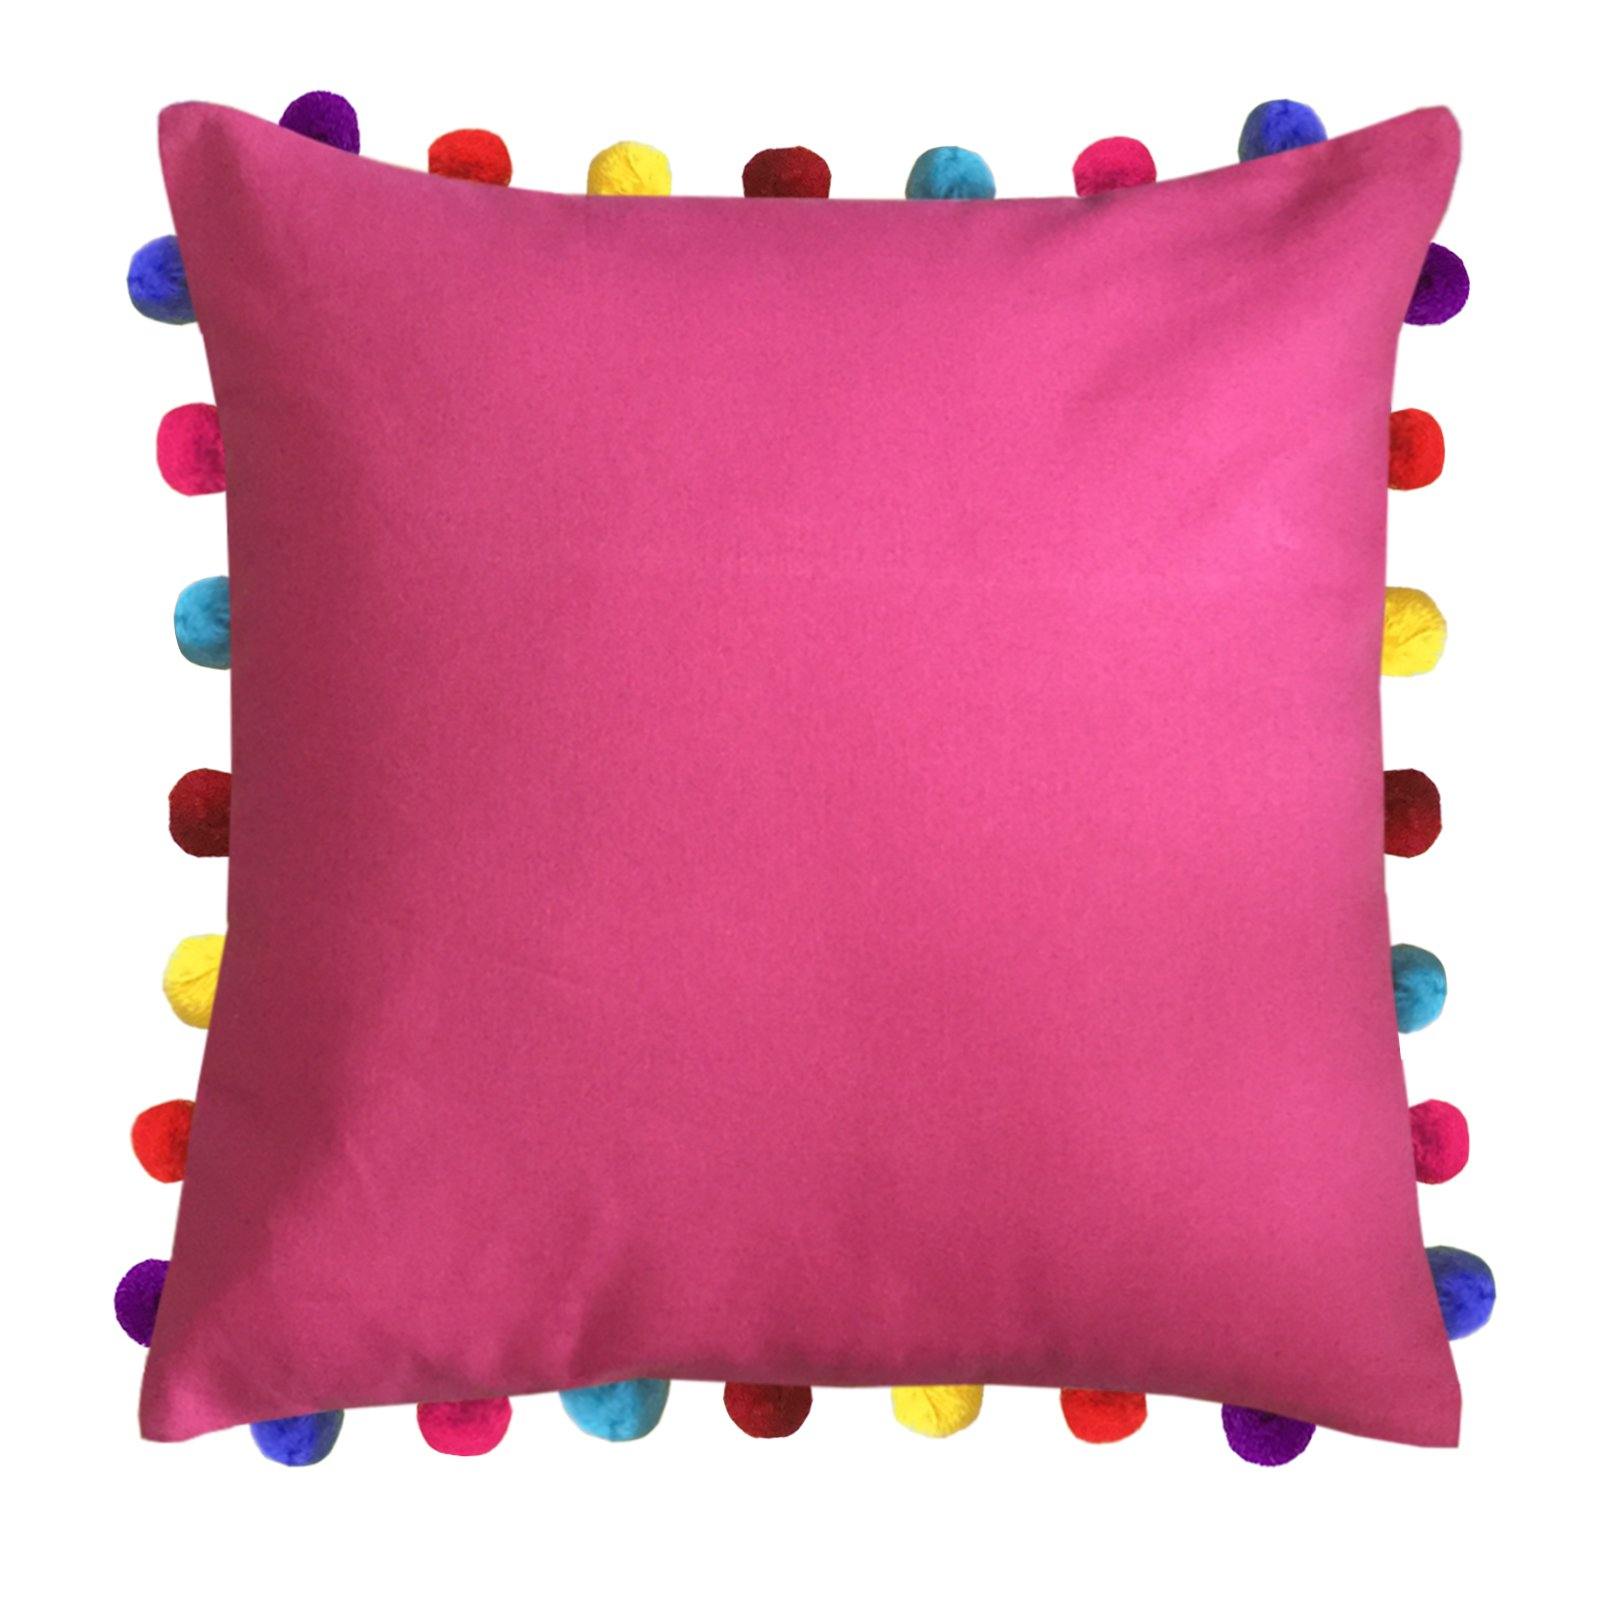 Lushomes Rasberry Cushion Cover with Colorful Pom Poms (Single pc, 20 x 20”) - Lushomes